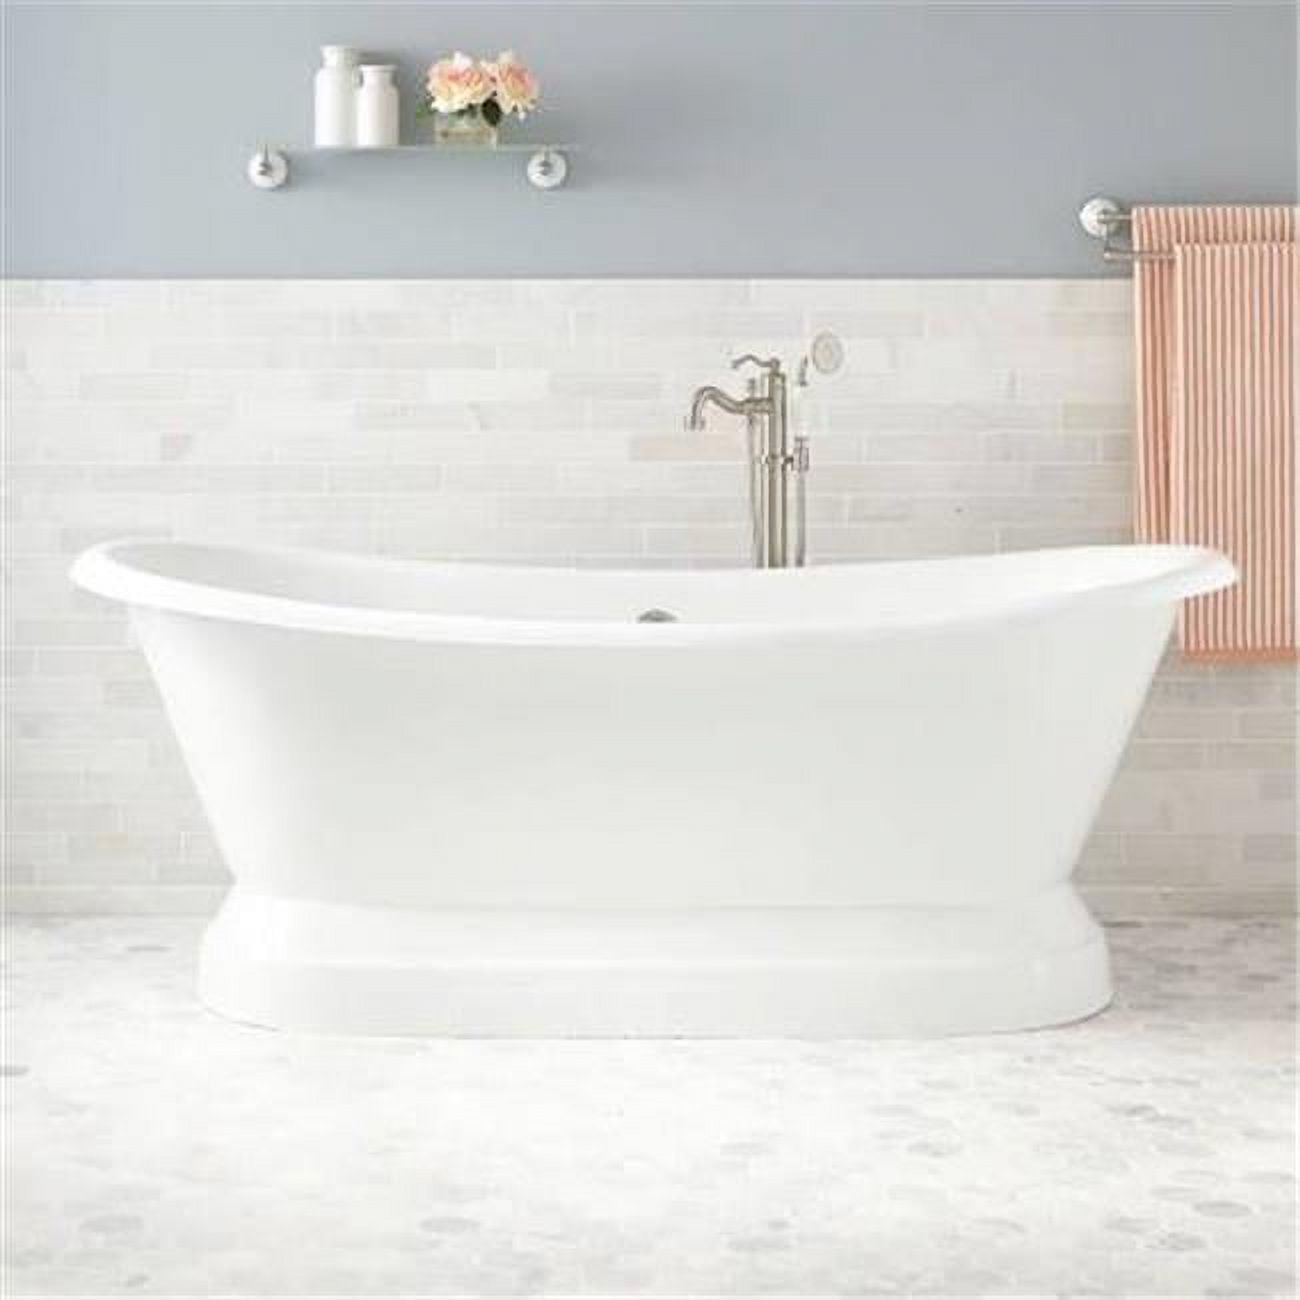 Des-dh-cp 71 X 30 In. Cast Iron Double Ended Slipper Tub With 7 In. Deck Mount Faucet Drillings & Polished Chrome Feet